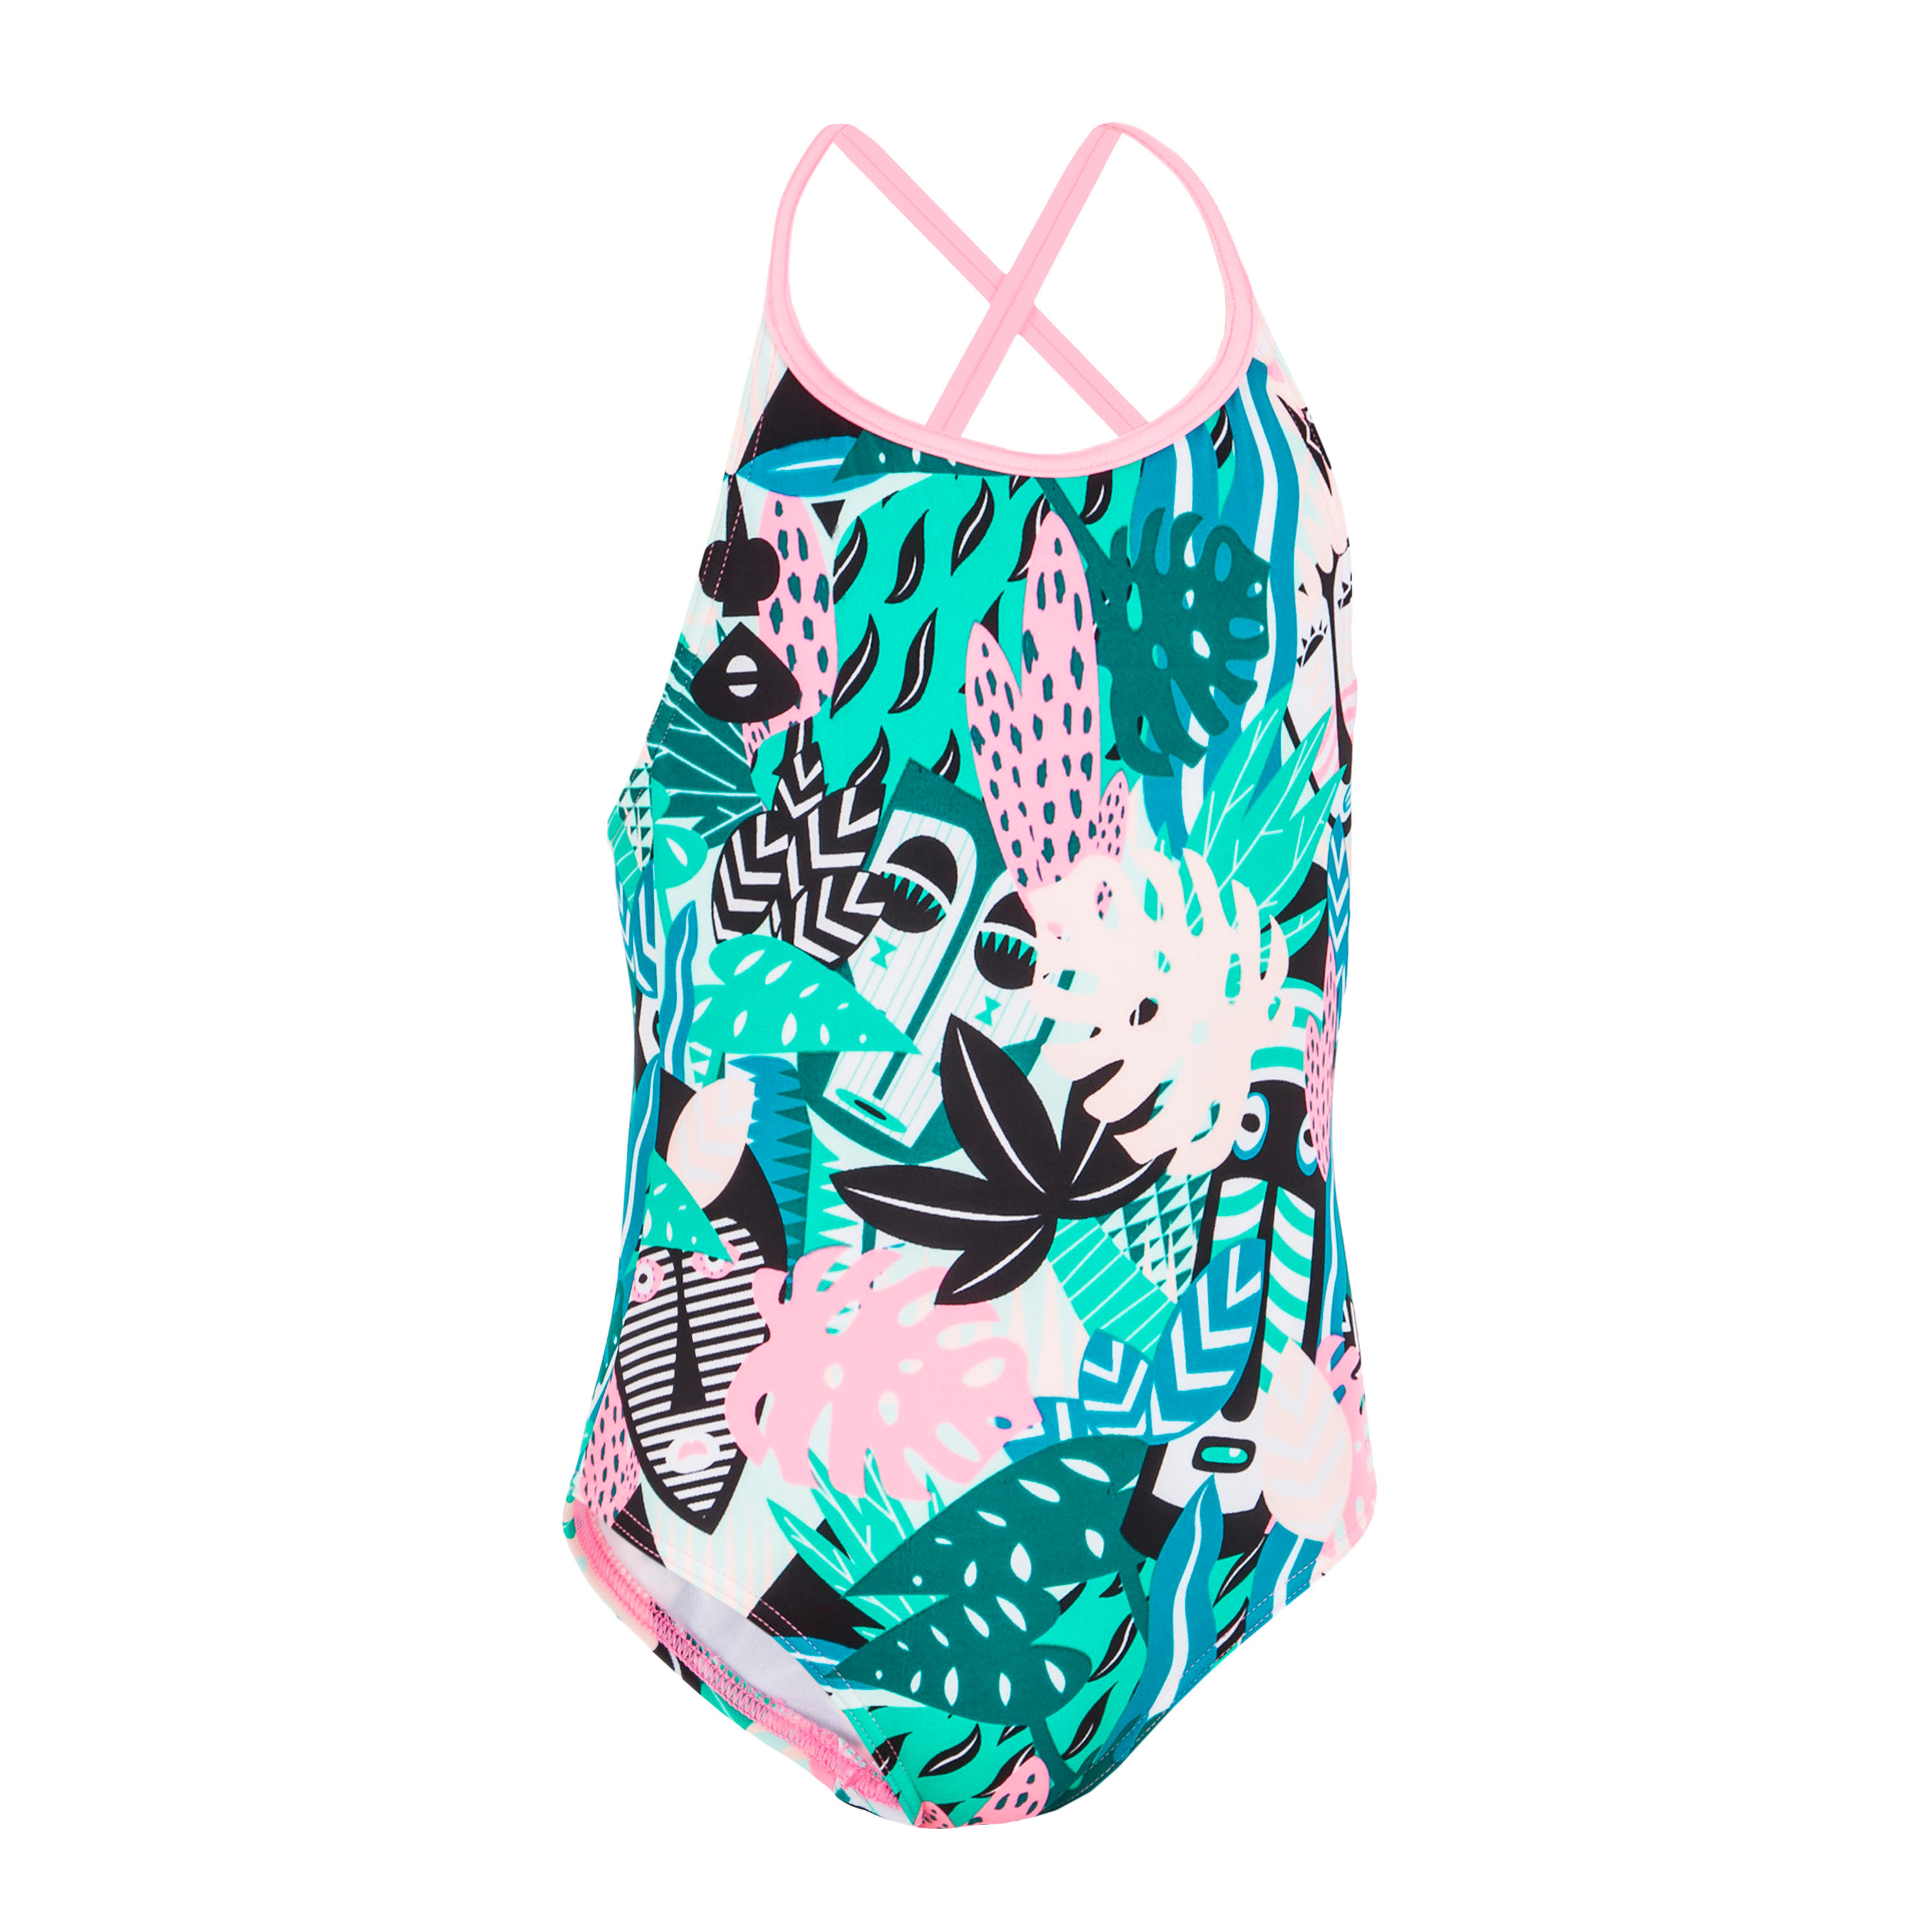 Girls' Swimming One-Piece Swimsuit - Riana All Mask Green 5/5